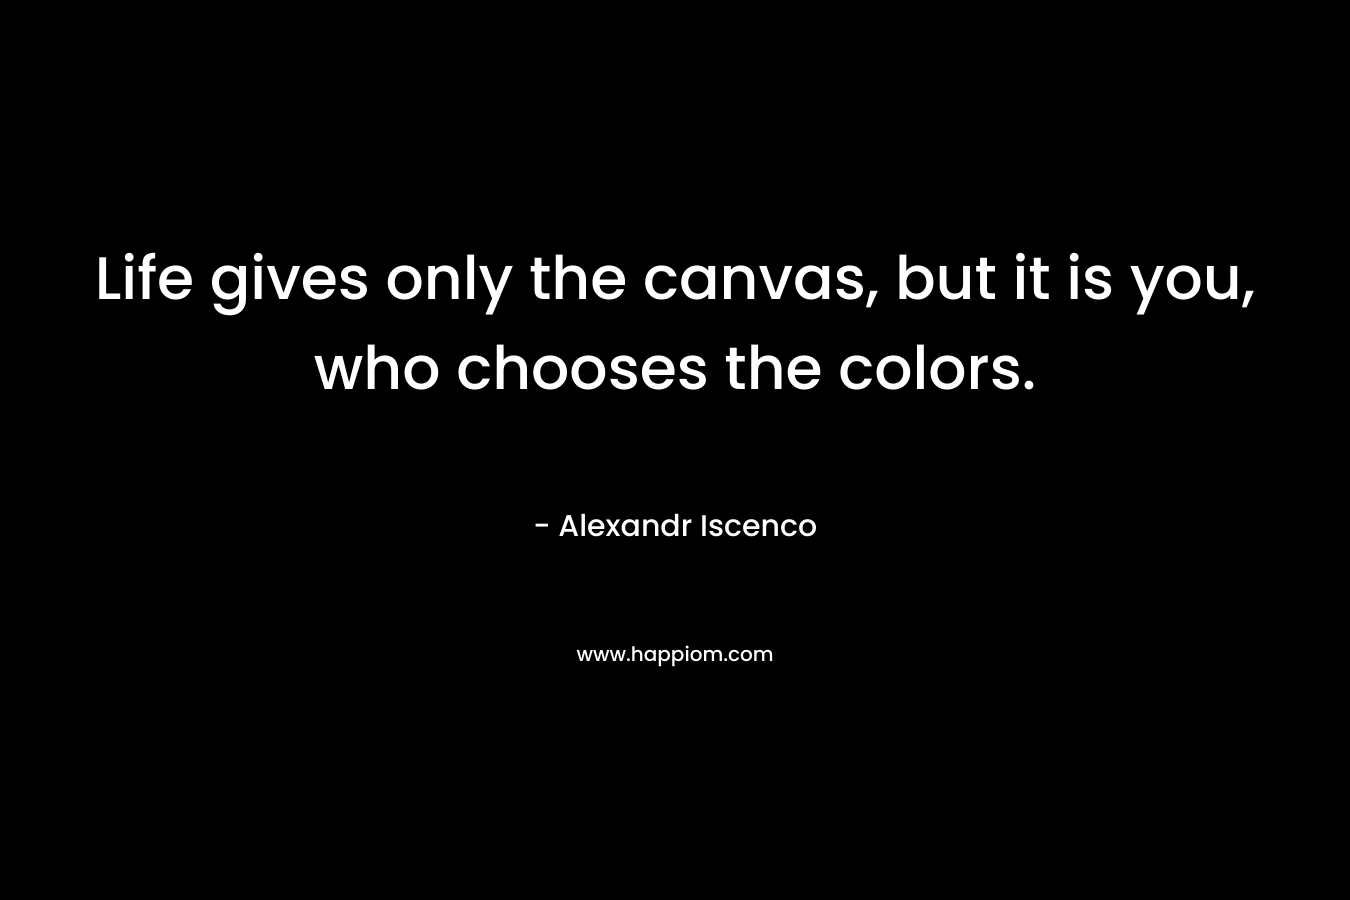 Life gives only the canvas, but it is you, who chooses the colors.